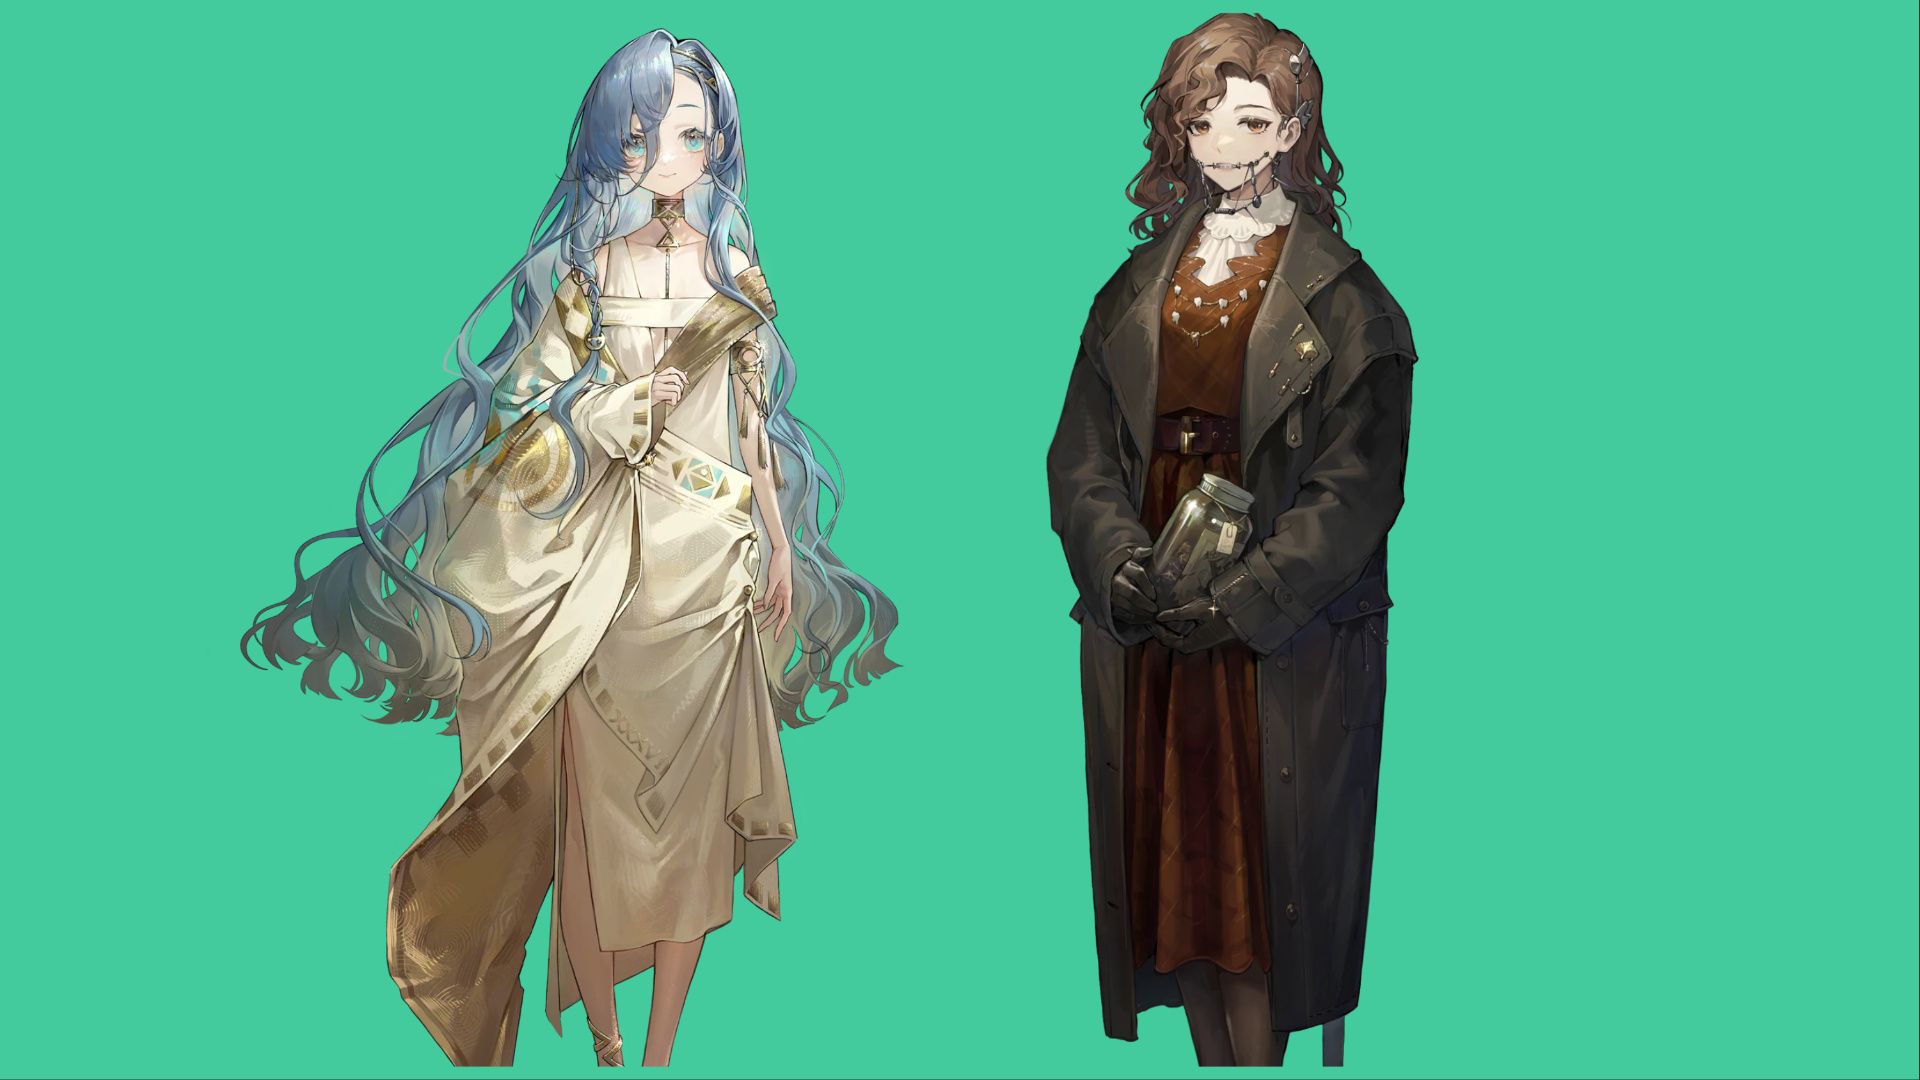 feature image for our reverse 1999 future banners guide, the image features two pieces of official art of the characters 37 and tooth fairy from the game, tooth fairy is holding a jar as she wears gloves and has a mechanical brace contraption on her lower face, 37 is smiling as her hair flowers